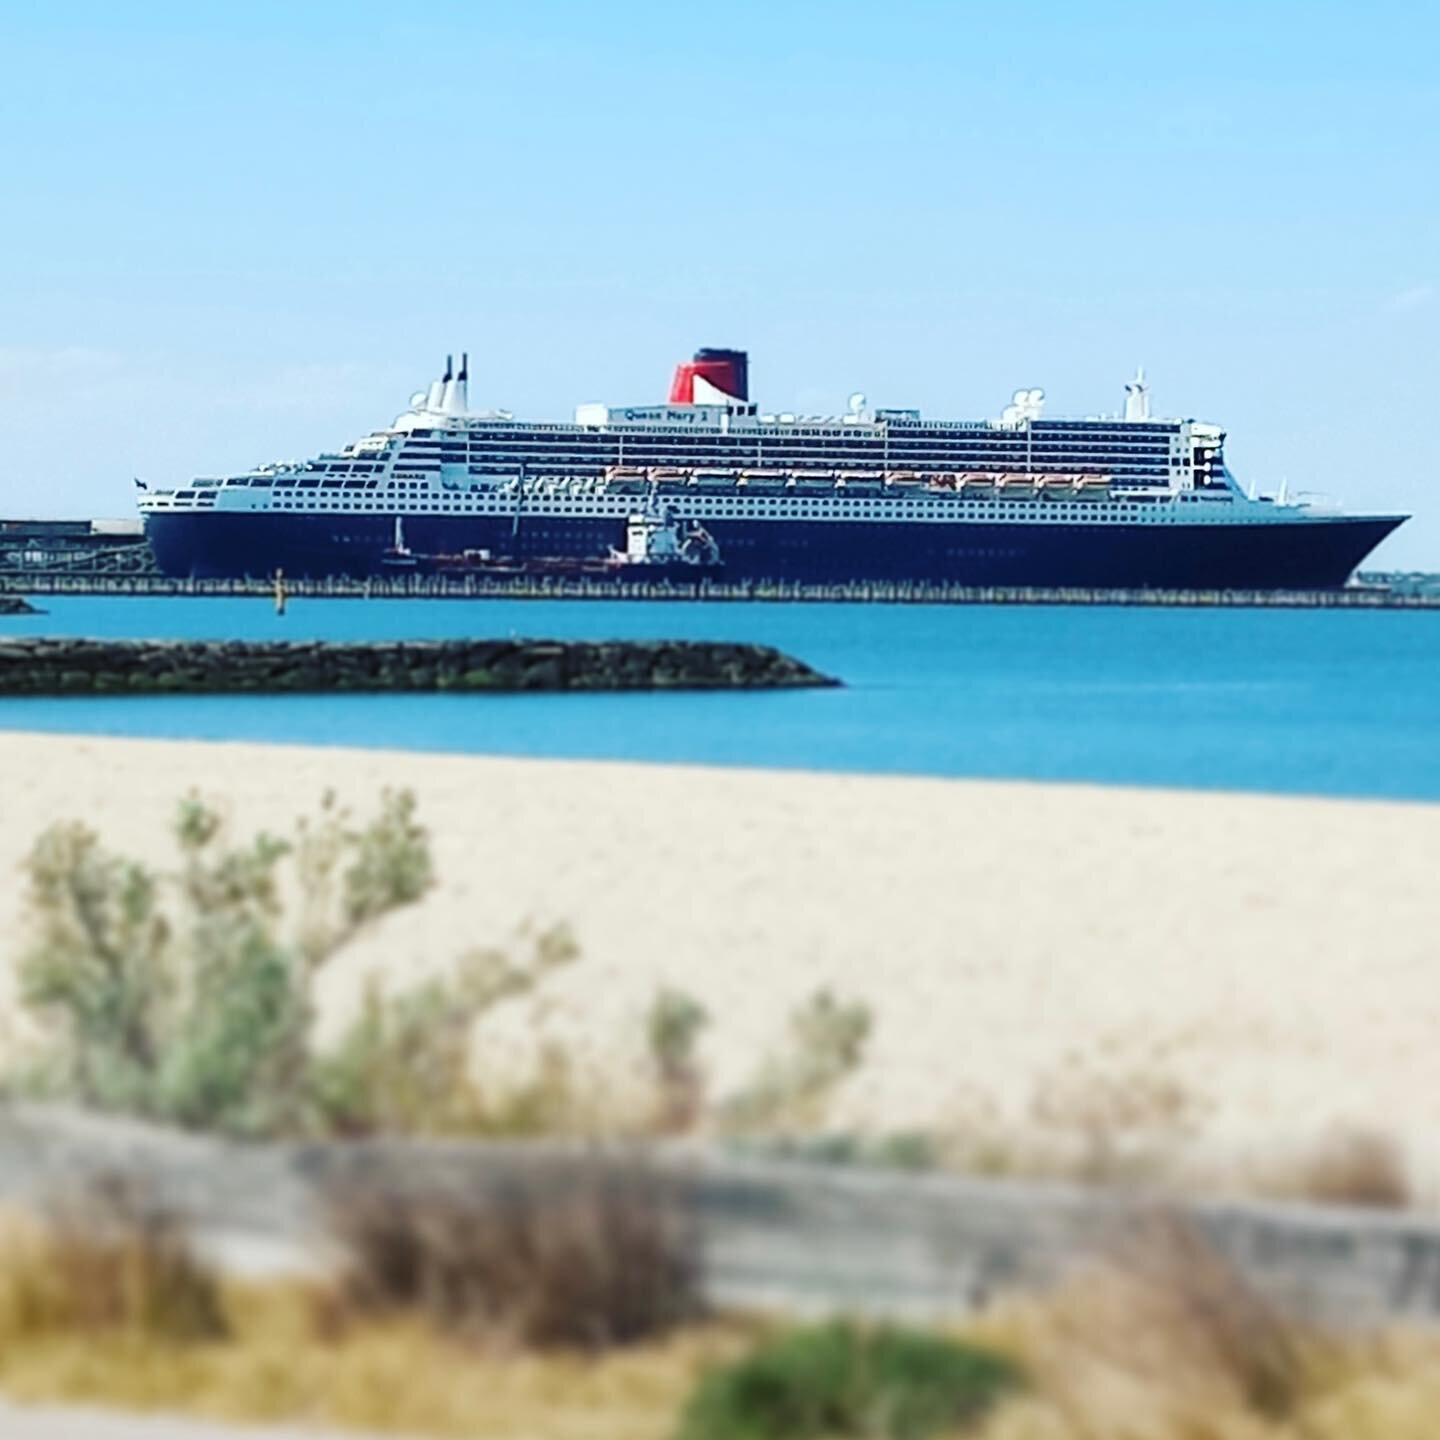 This morning the Waterfront Welcomers met the 3,466 passengers and crew from the Queen Mary 2.

Welcome to Port Melbourne and the City of Port Phillip 👋

This is the largest vessel to arrive at Station Pier this year. It definitely is quite a specta